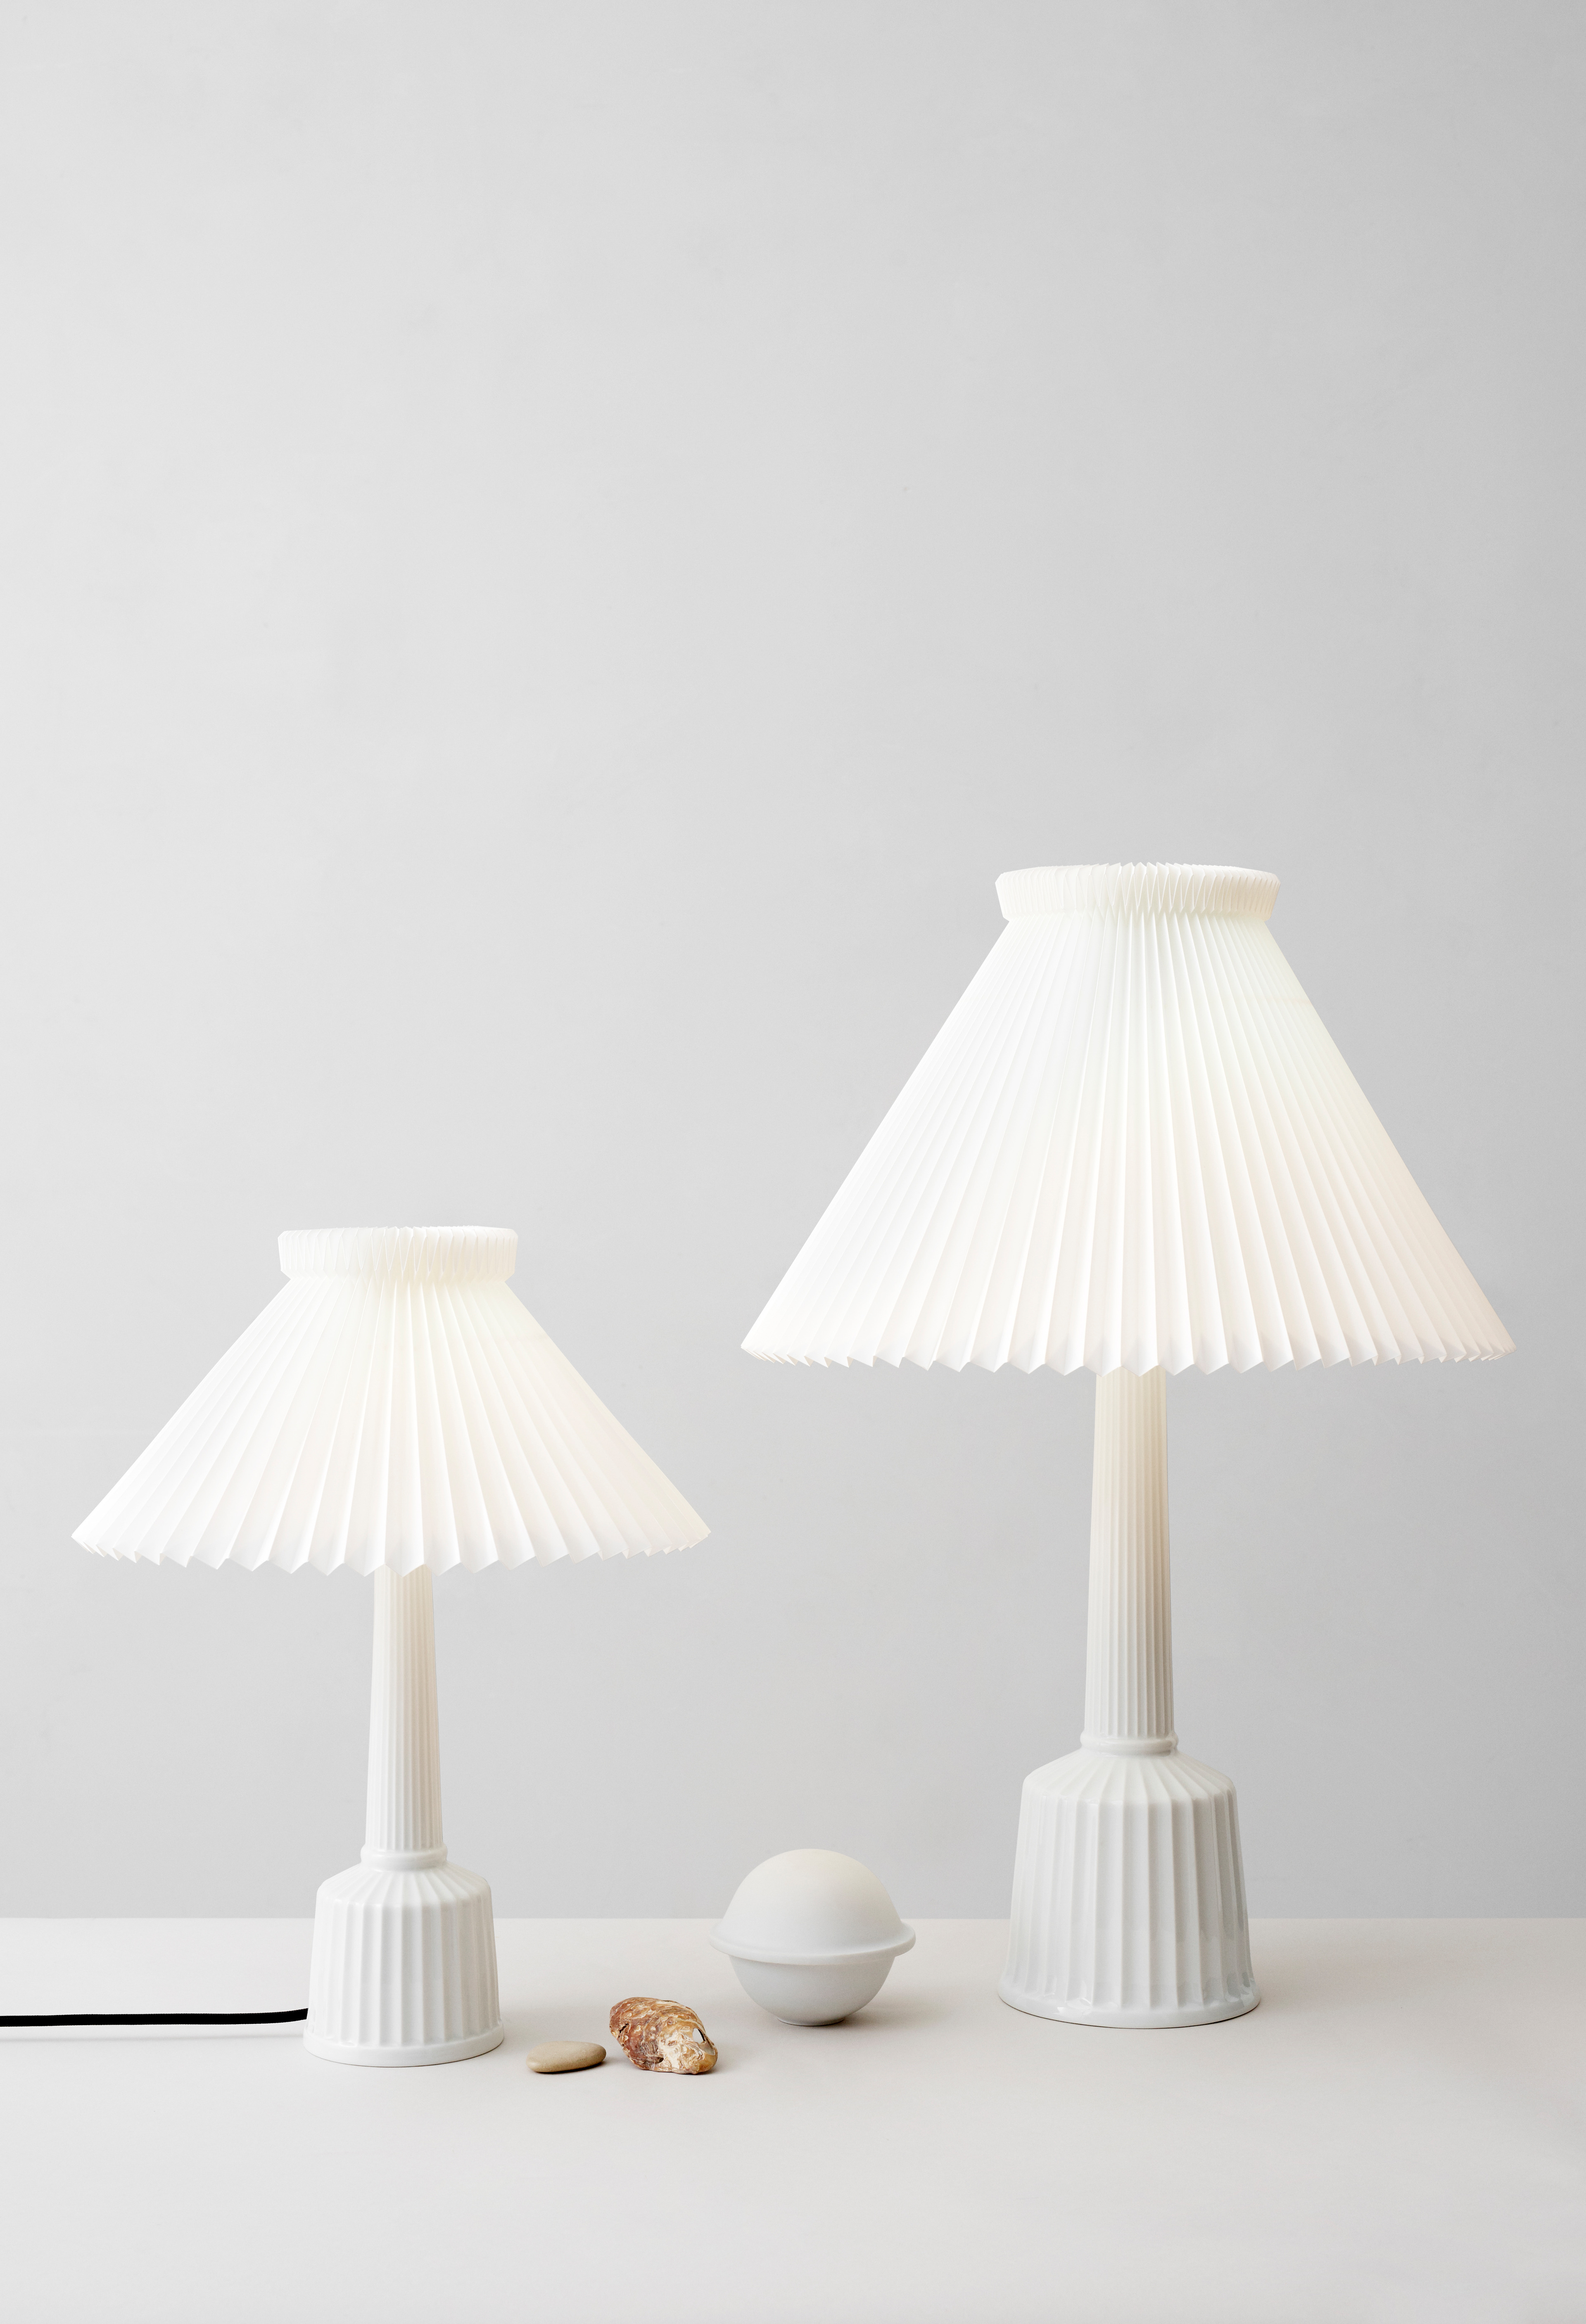 Lamps in collaboration with Esben Klint, Lyngby Porcelæn